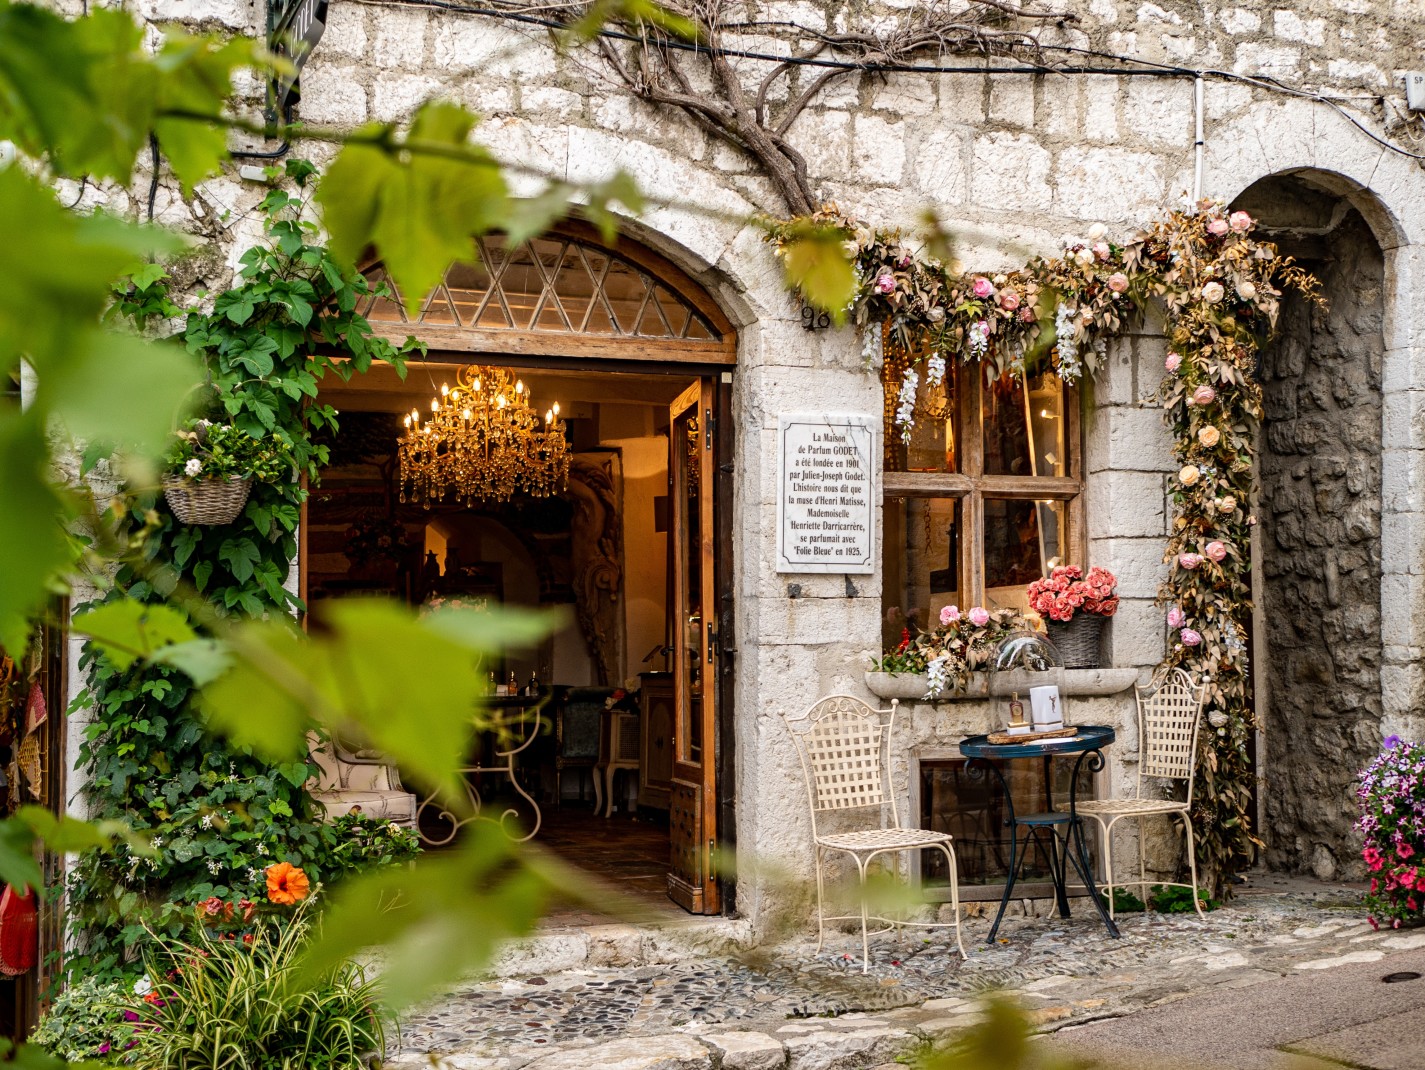 Charming cafe on a cobblestone street in the South of France. 